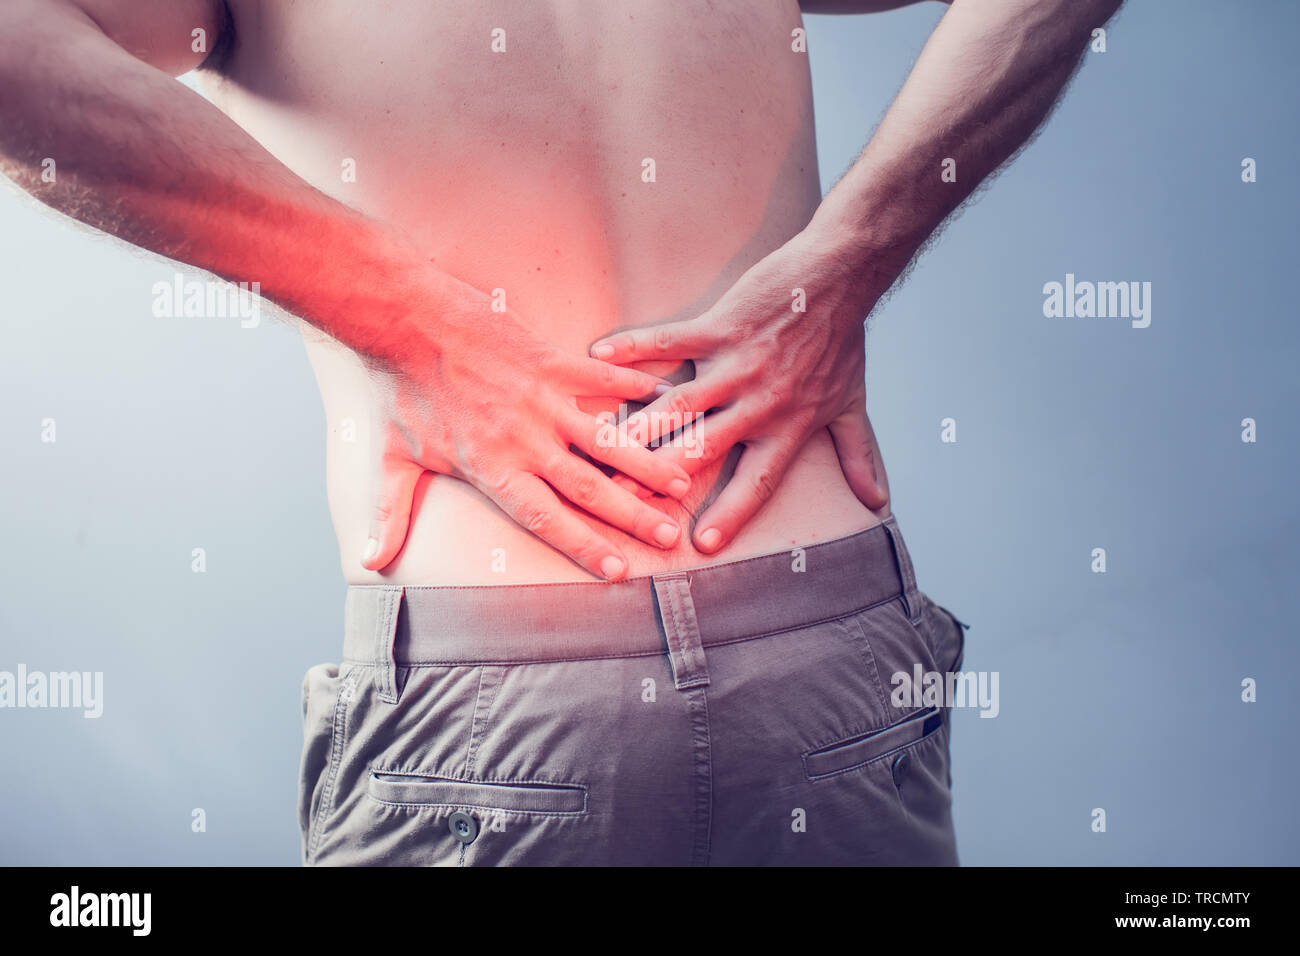 Lumbago symptom. Young man holding his painful inflamed loin. Health care and medicine. Stock Photo